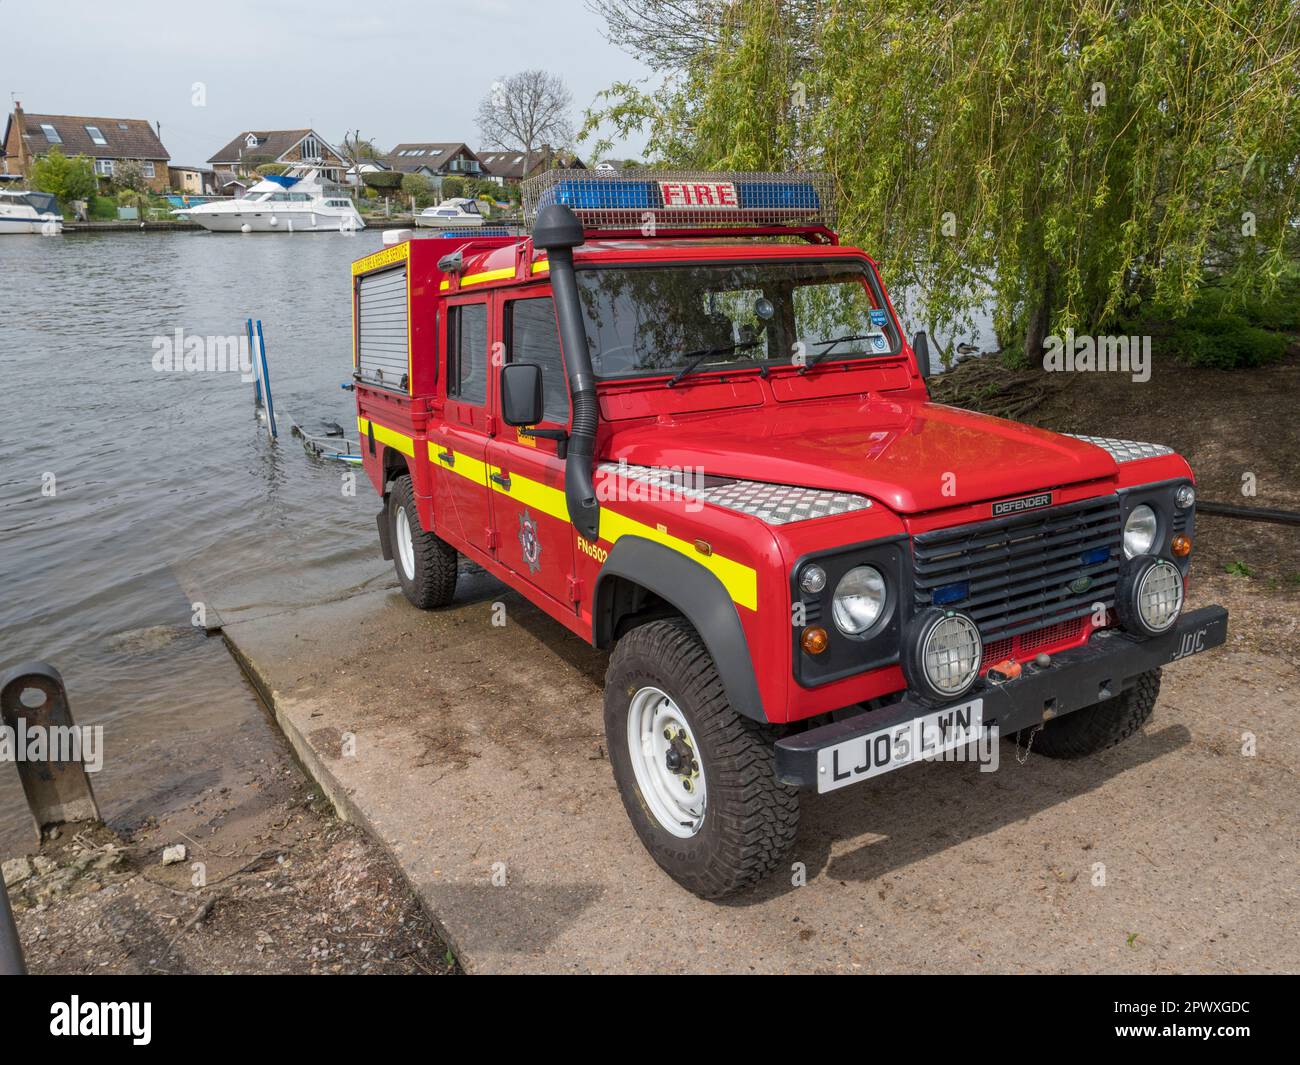 A Surrey Fire and Rescue Service Defender Land Rover on a boat slip (after launching a boat) beside the River Thames, Walton-on-Thames, Surrey, UK. Stock Photo